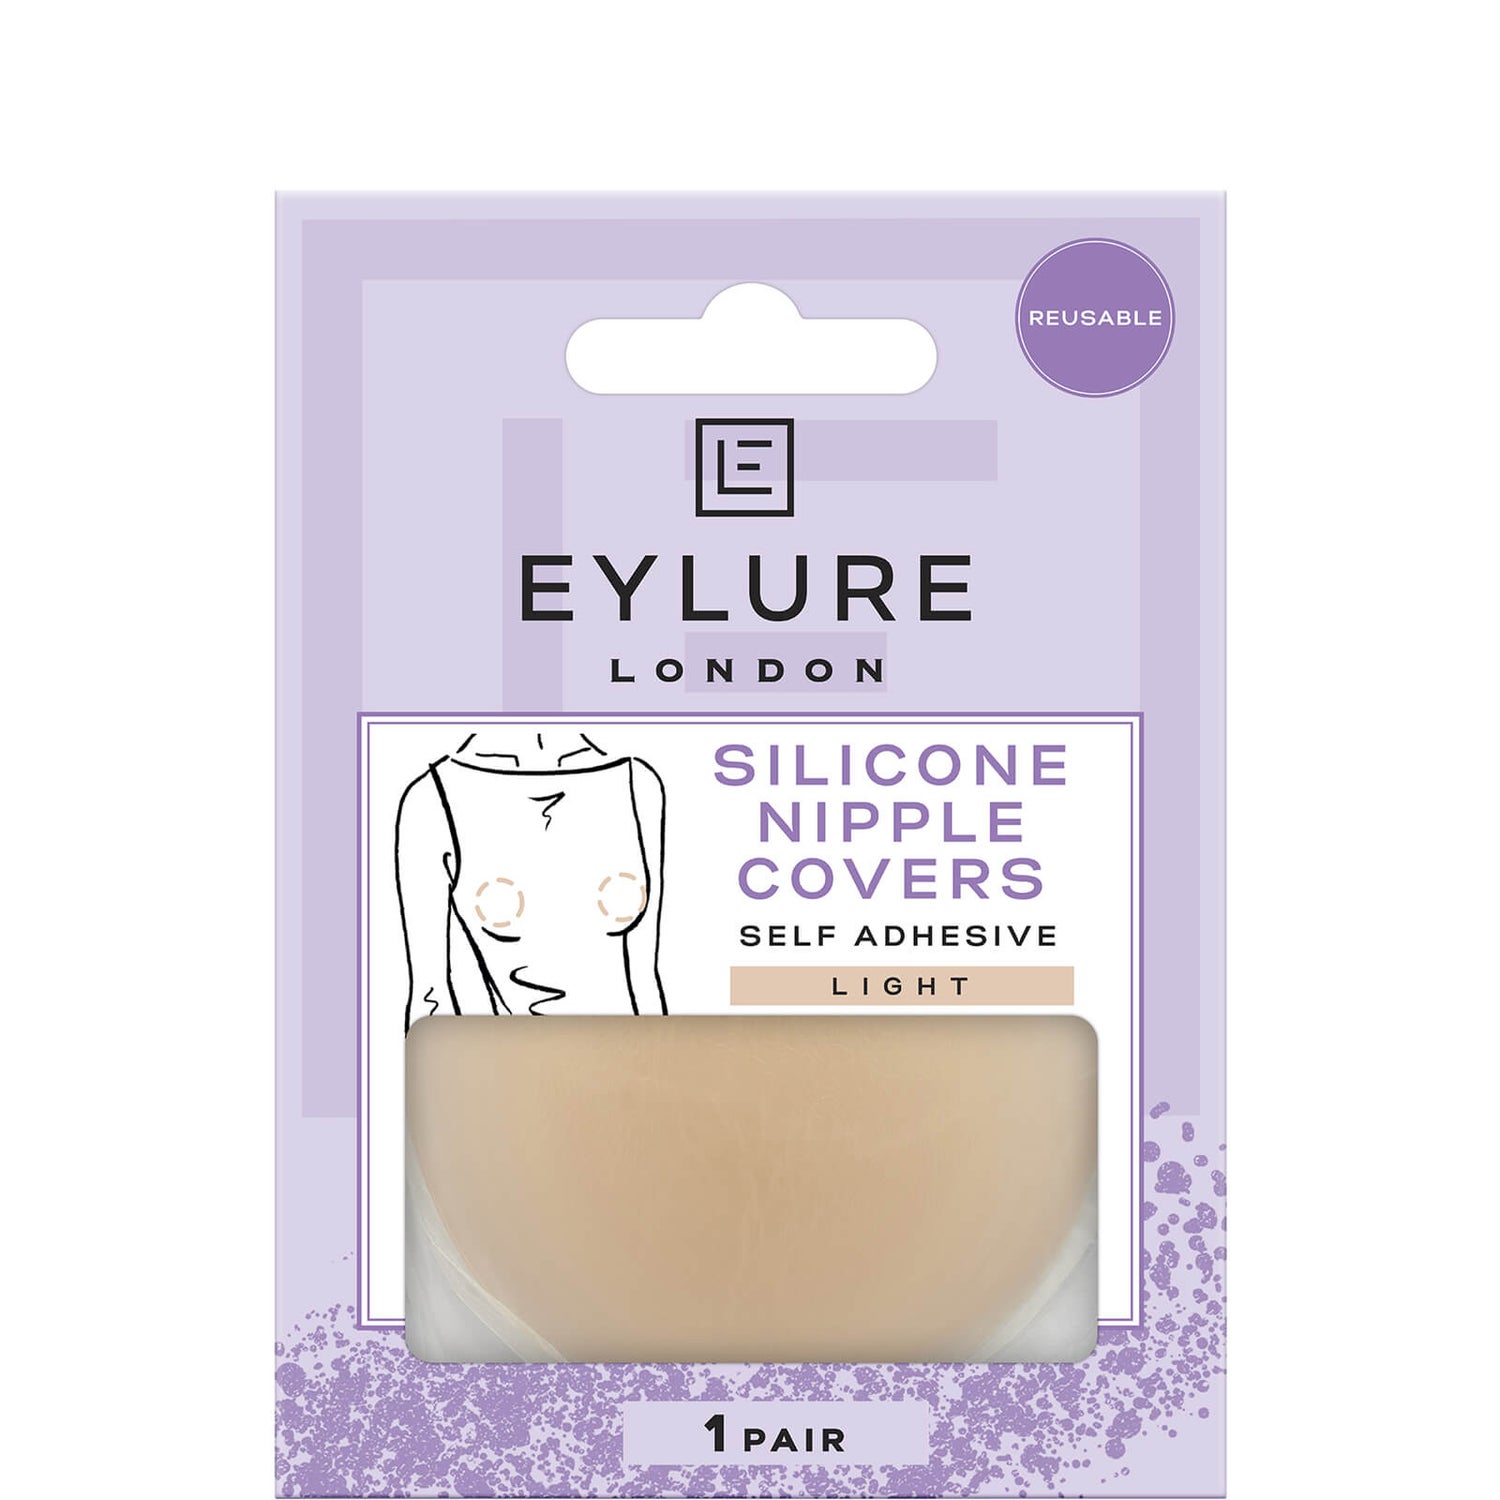 Eylure Silicone Nipple Covers - Light